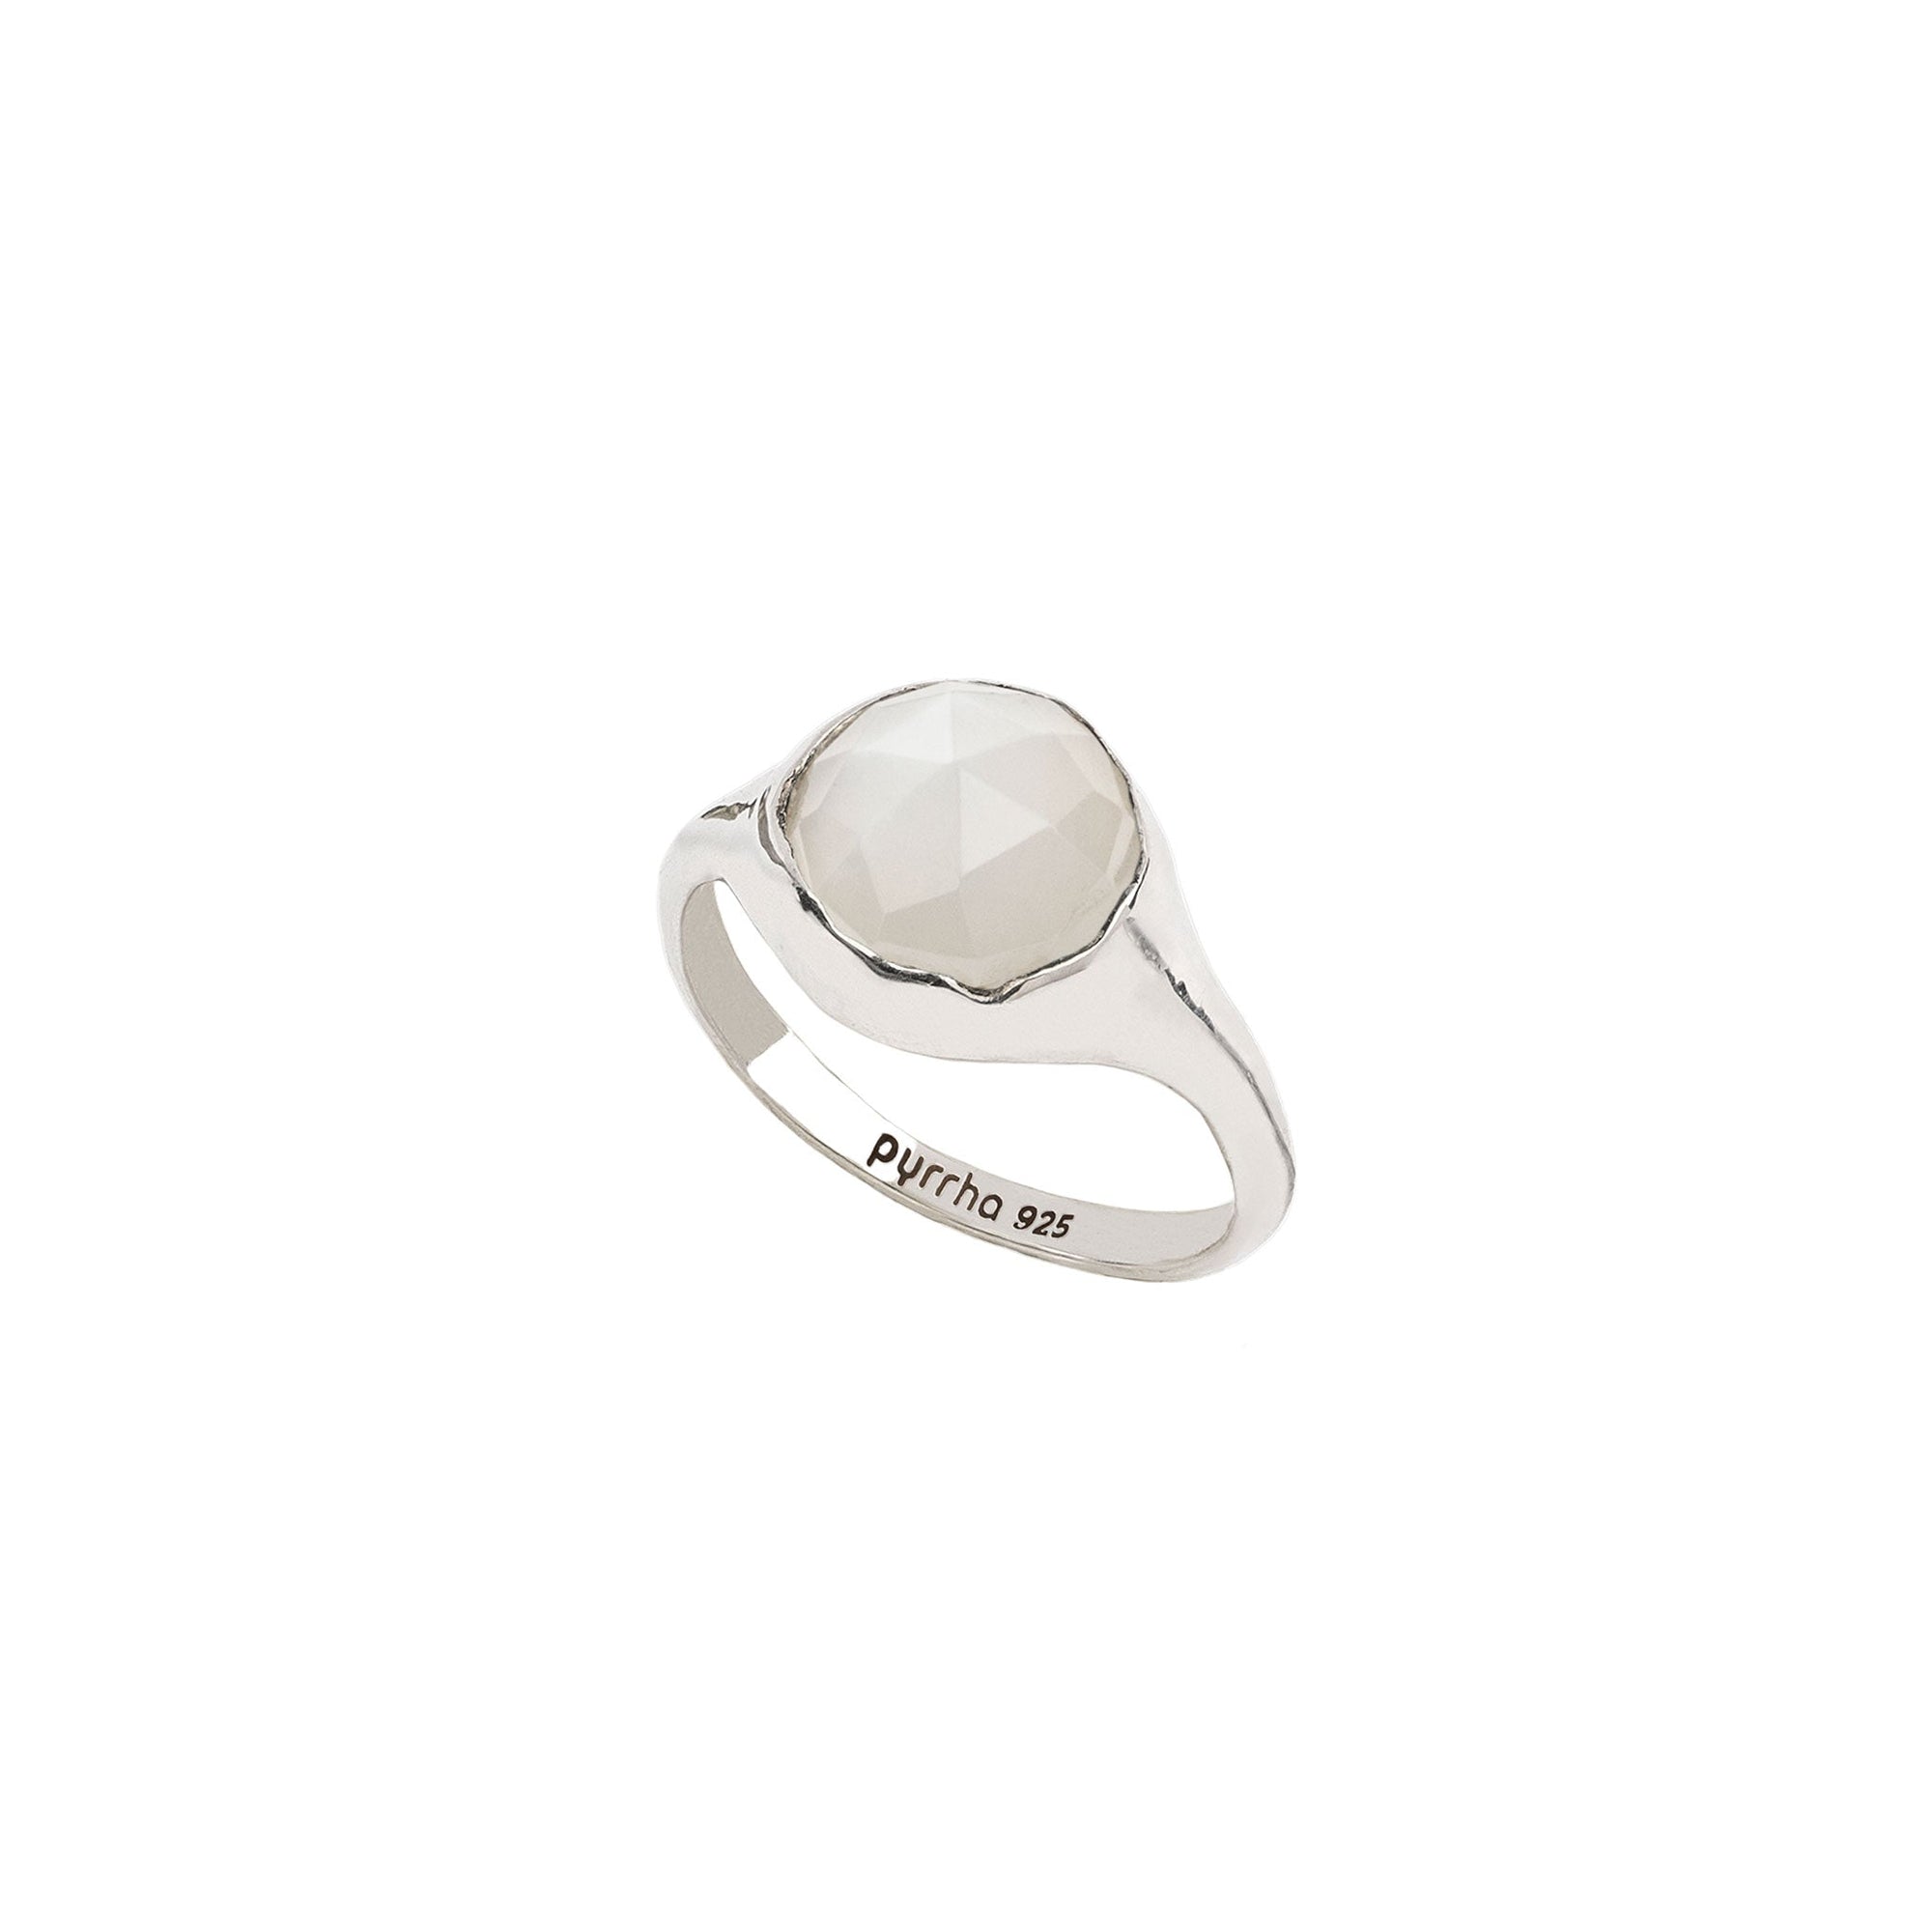 Moonstone Large Faceted Stone Set Signet Ring